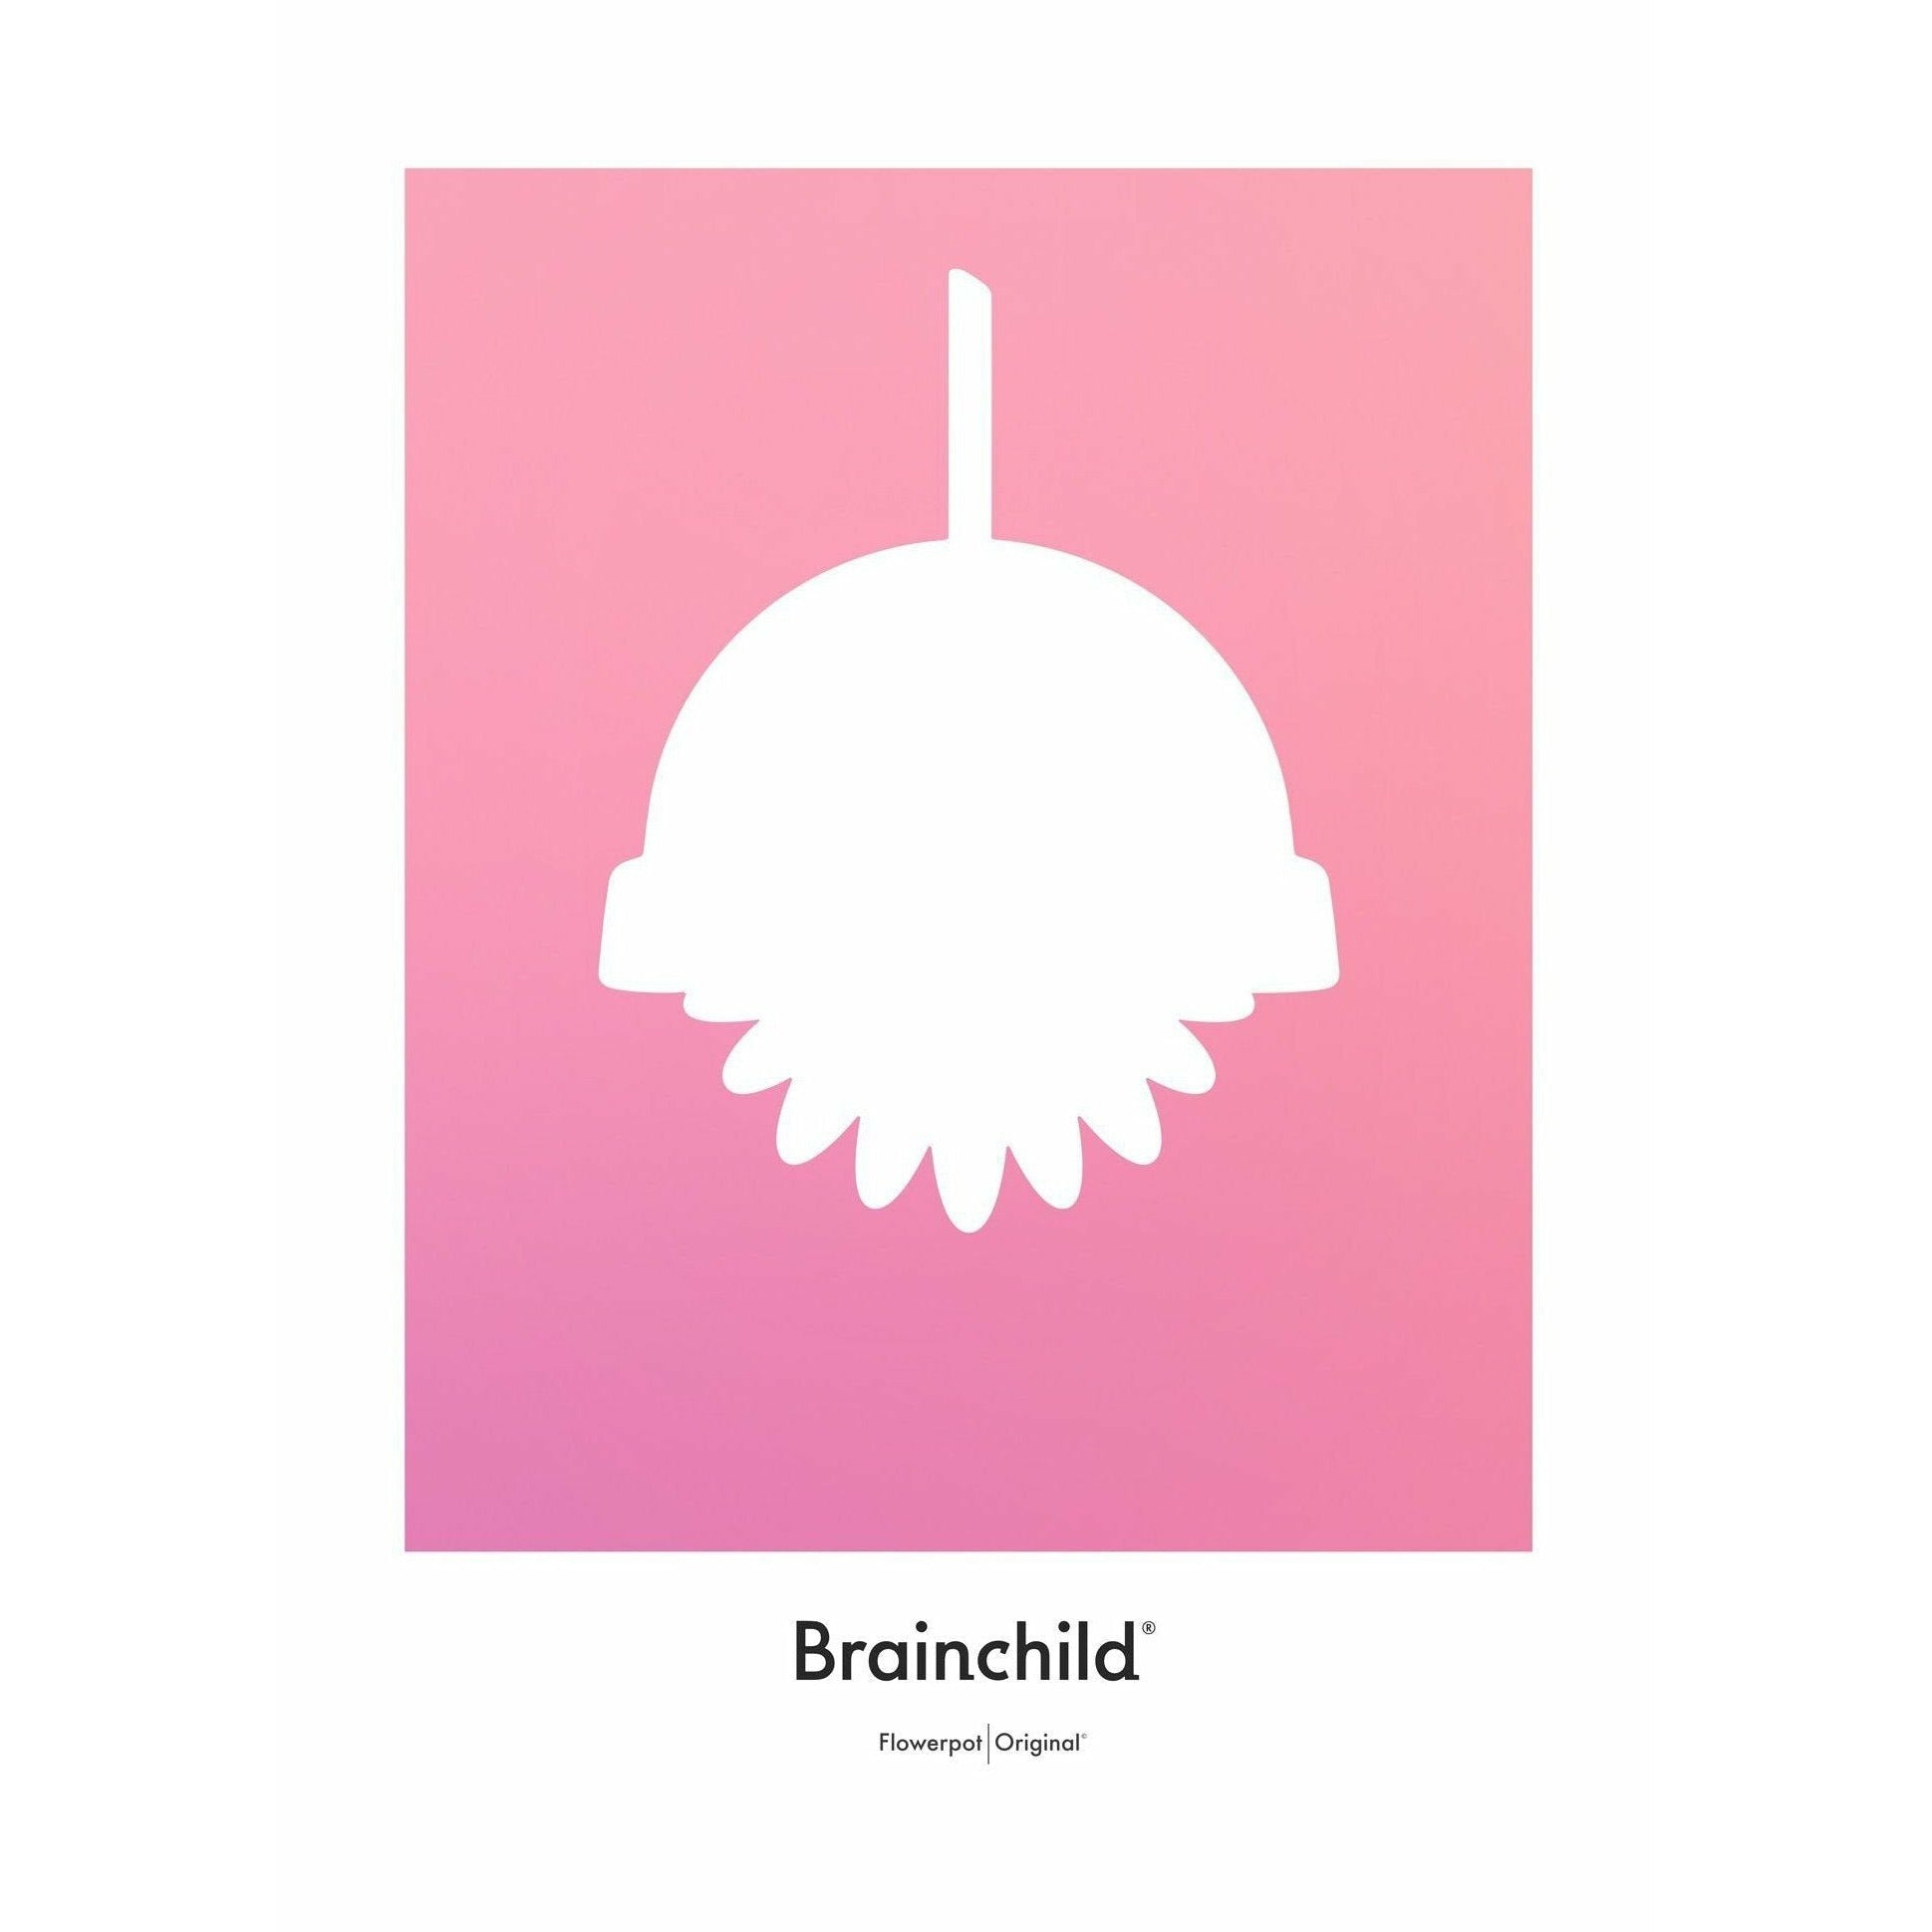 Brainchild Flowerpot Design Icon Poster Without Frame A5, Pink